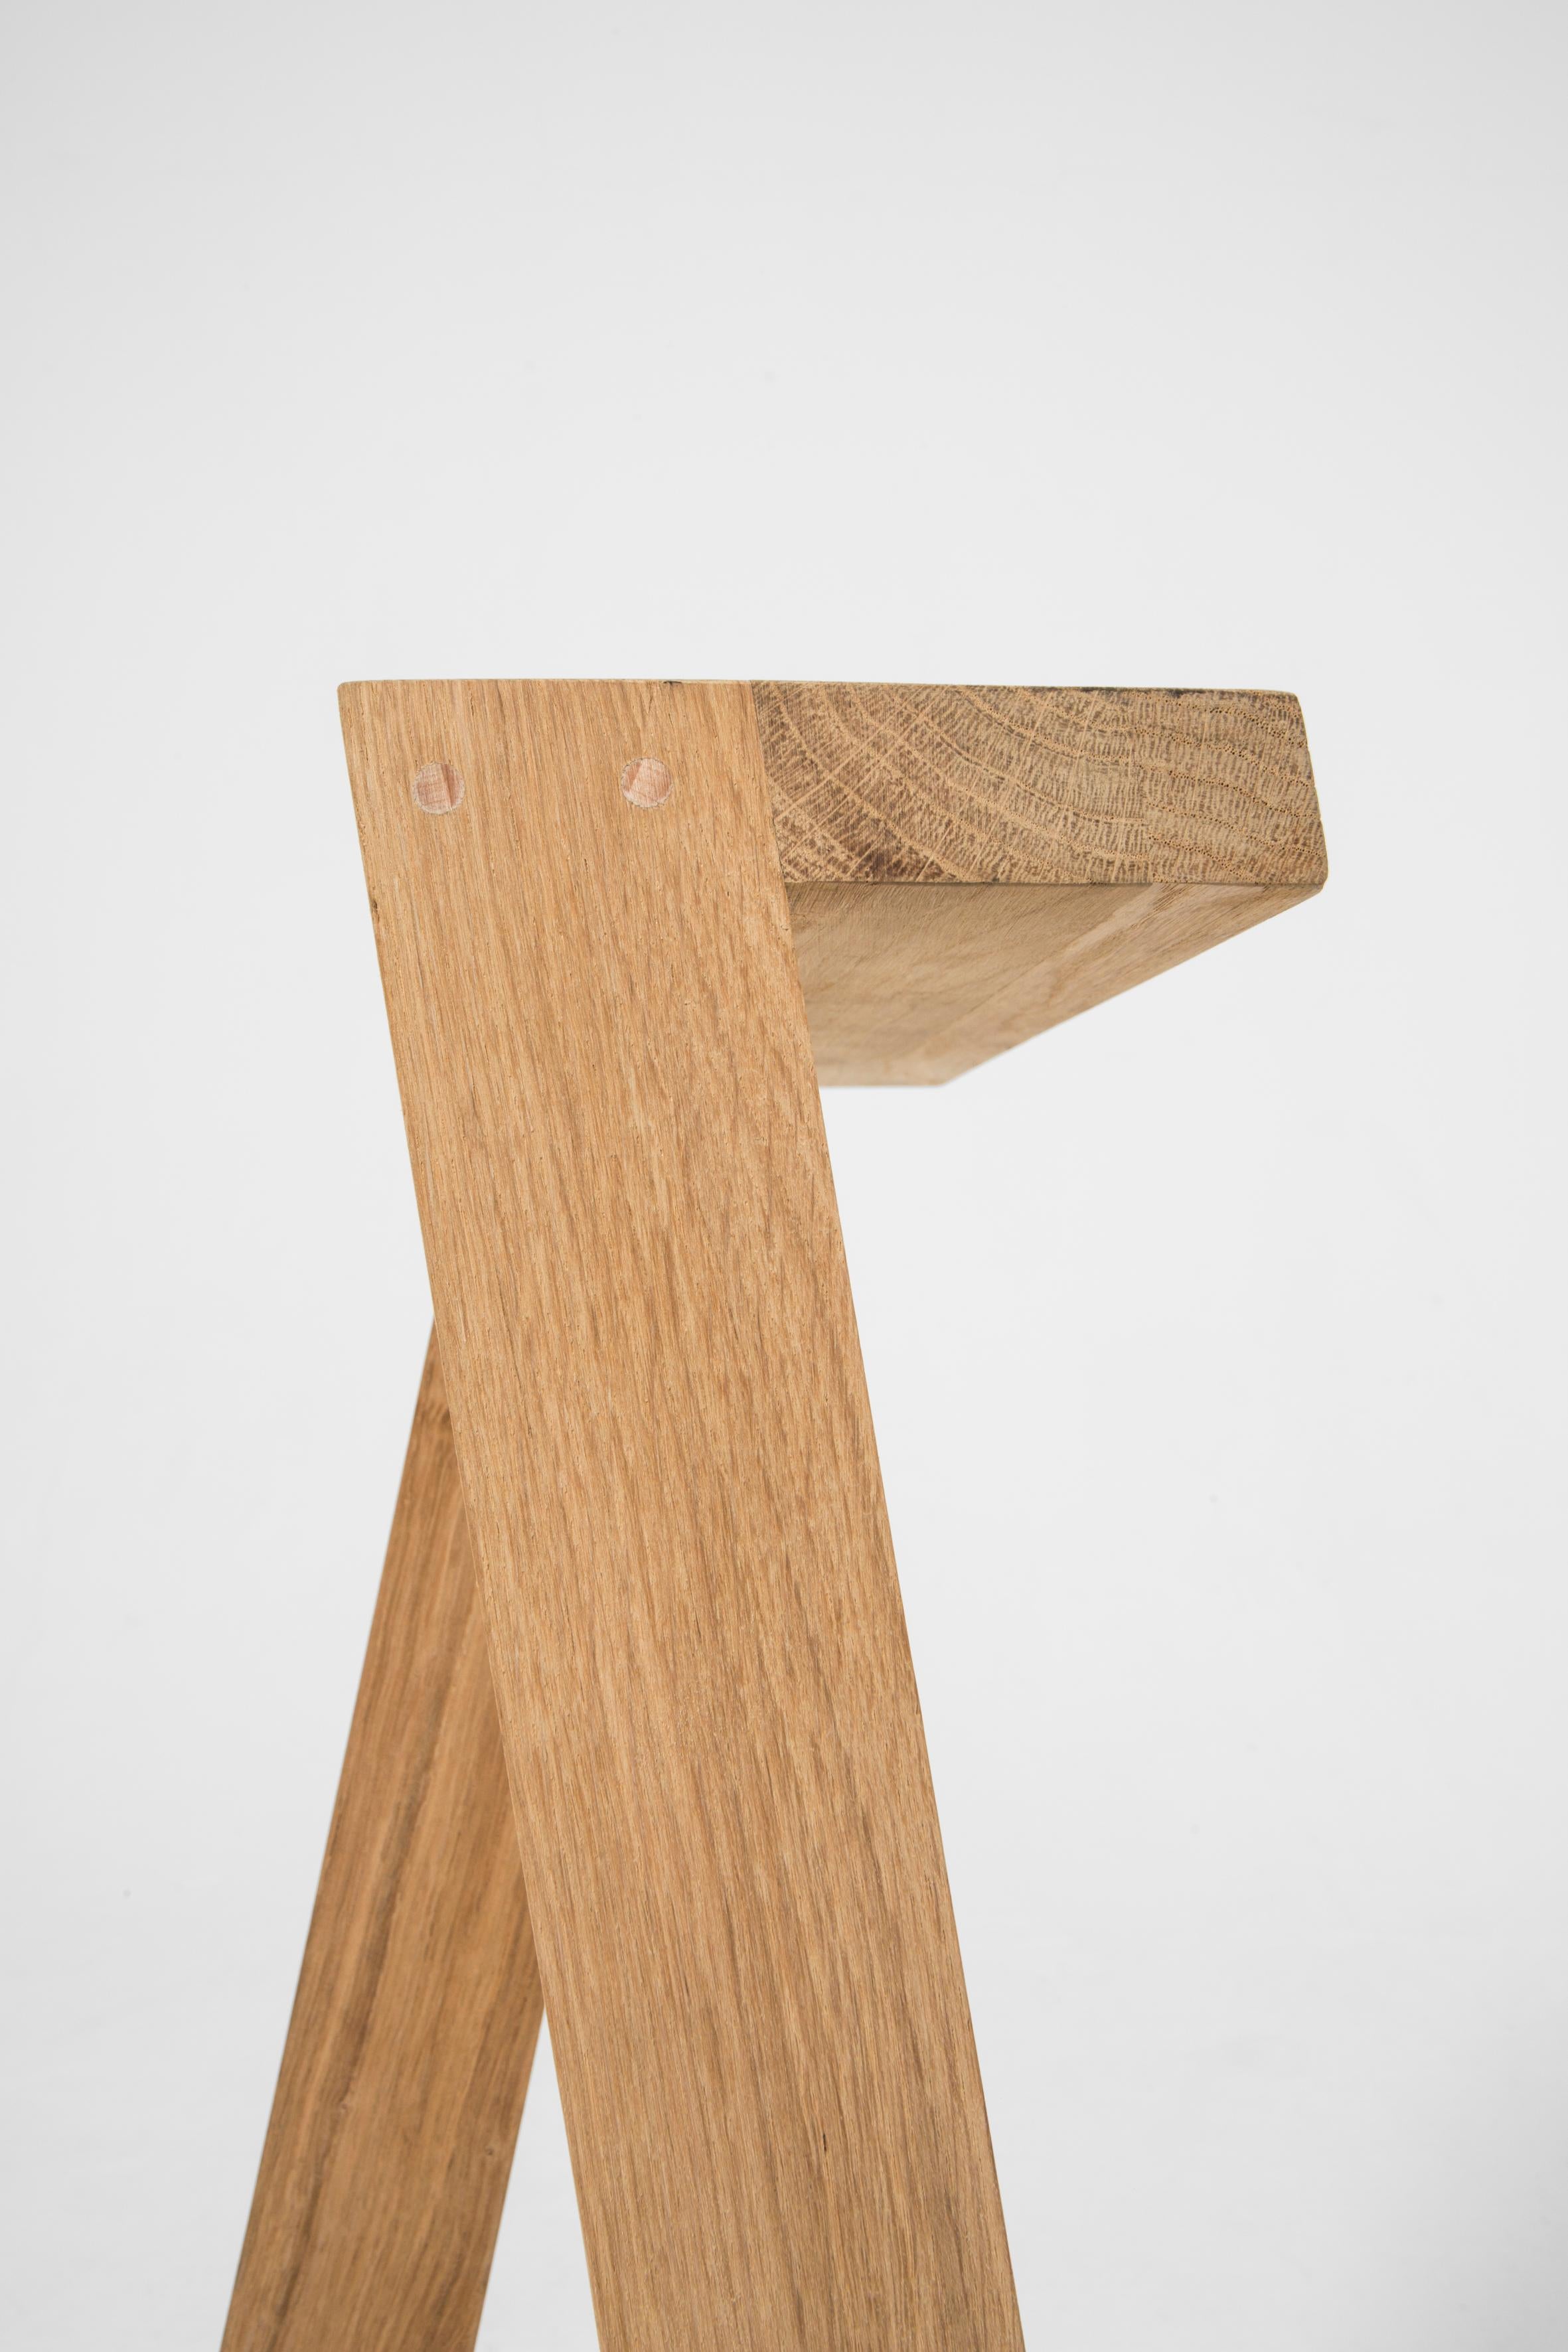 Other Set of 2 Small Pausa Oak Stool by Pierre-Emmanuel Vandeputte For Sale